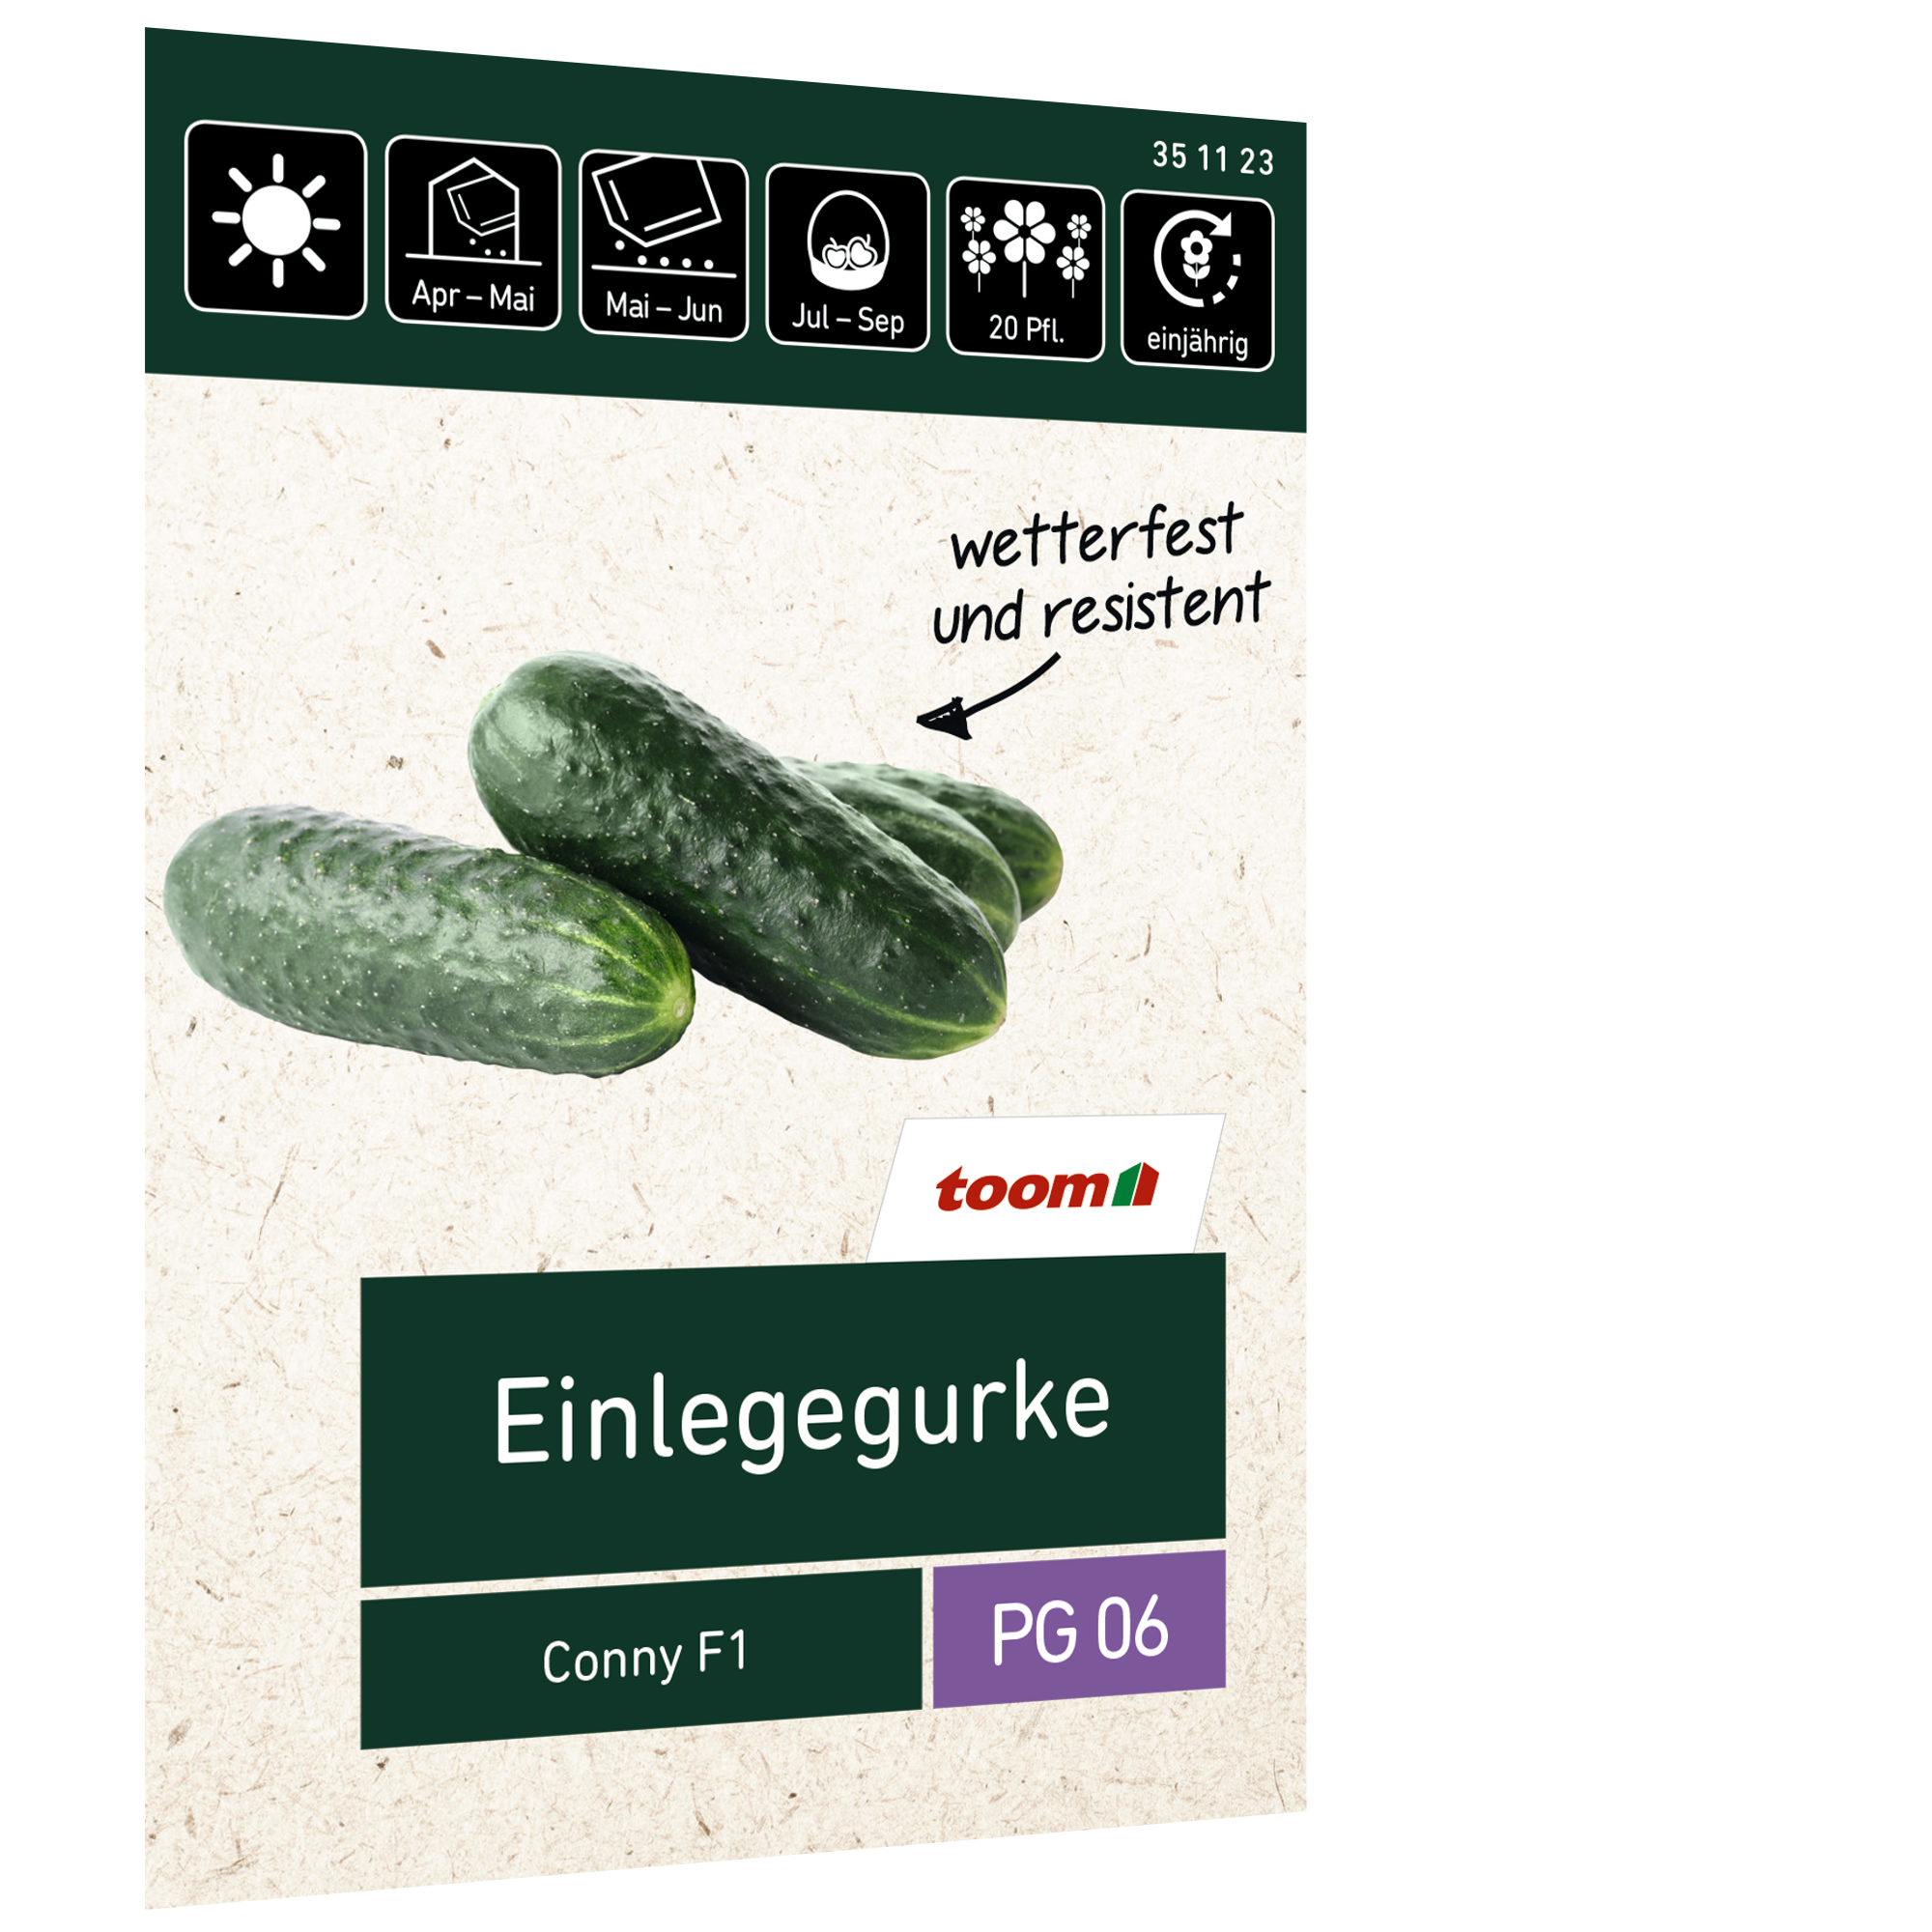 Einlegegurke 'Conny F1' + product picture